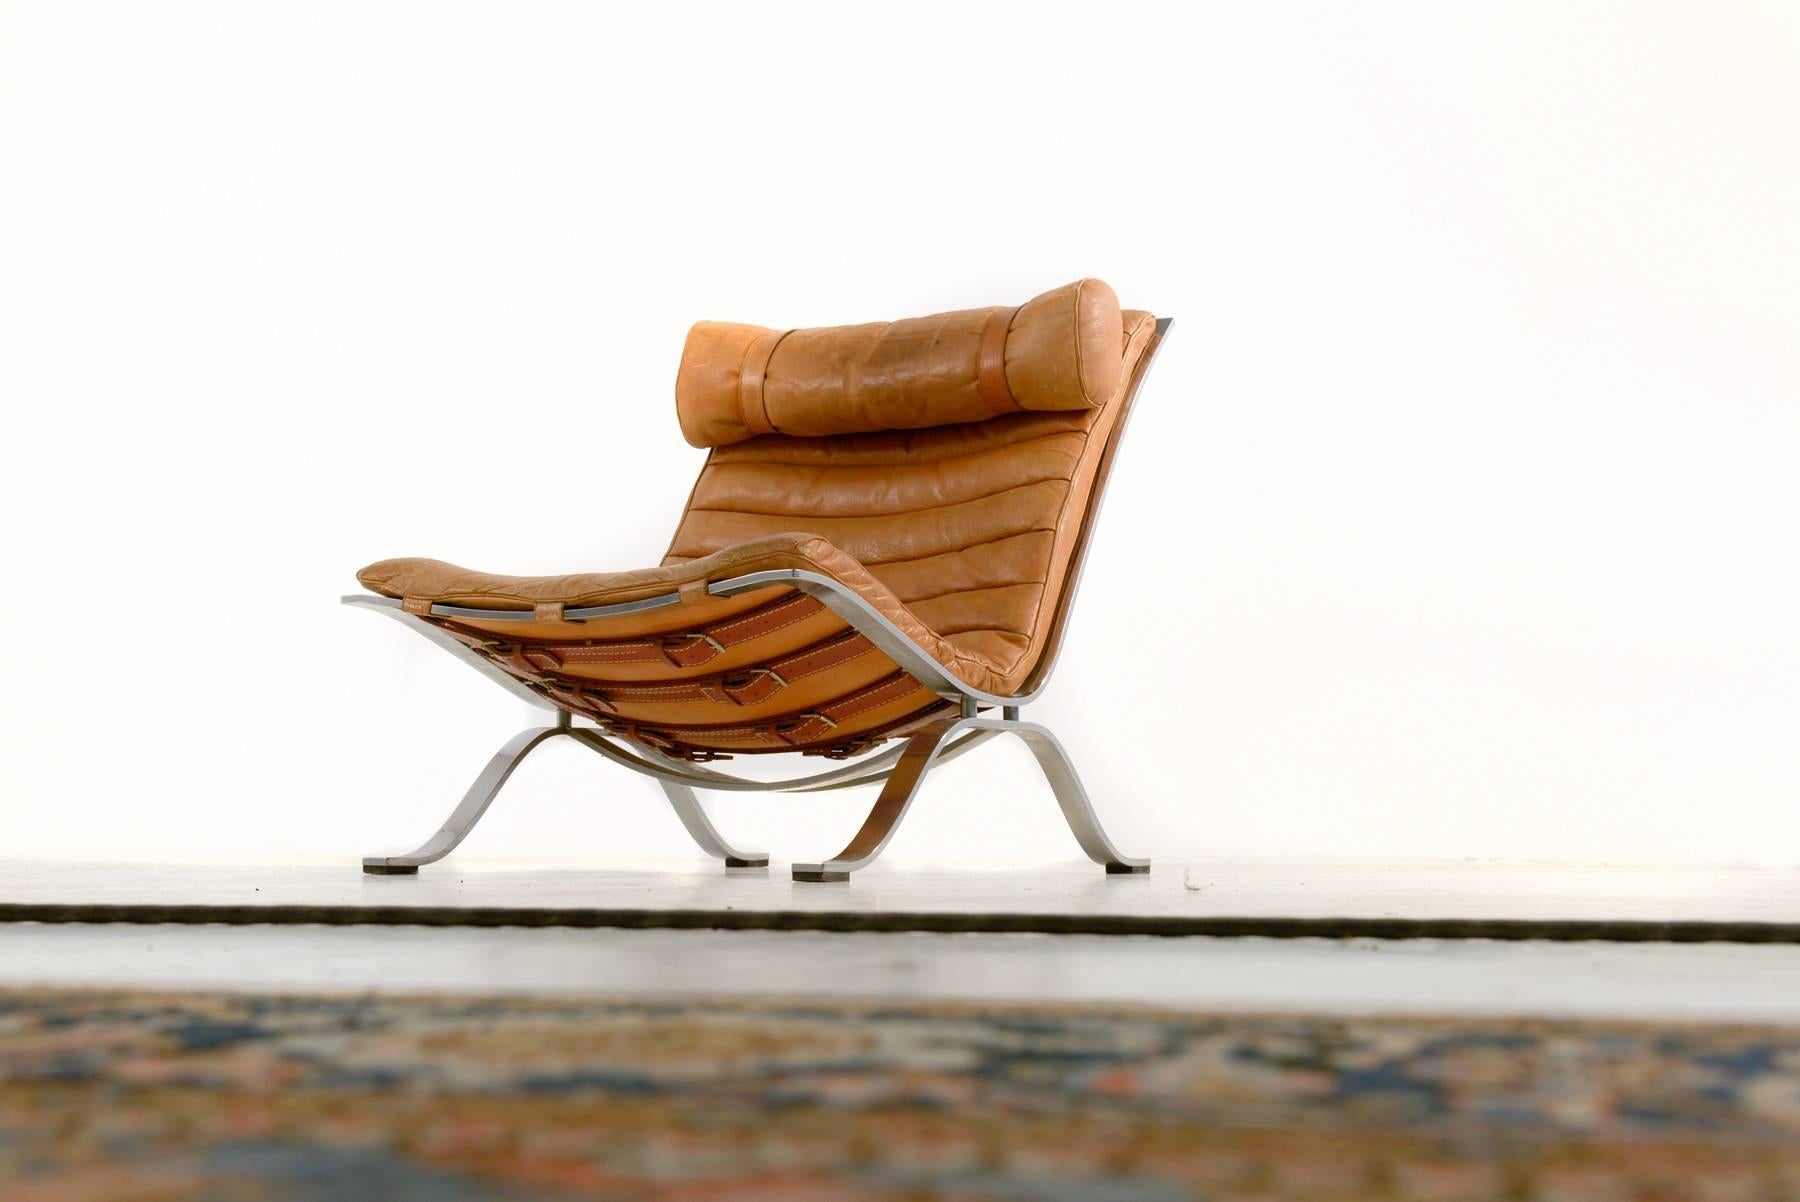 Ari chair.
Designed by Arne Norell for Norell Möbler, Sweden in 1966.
Beautiful patinated brown leather.
This award winning lounge chair was made of high quality flat chrome-plated steel and has very thick original buffalo leather.
In very good